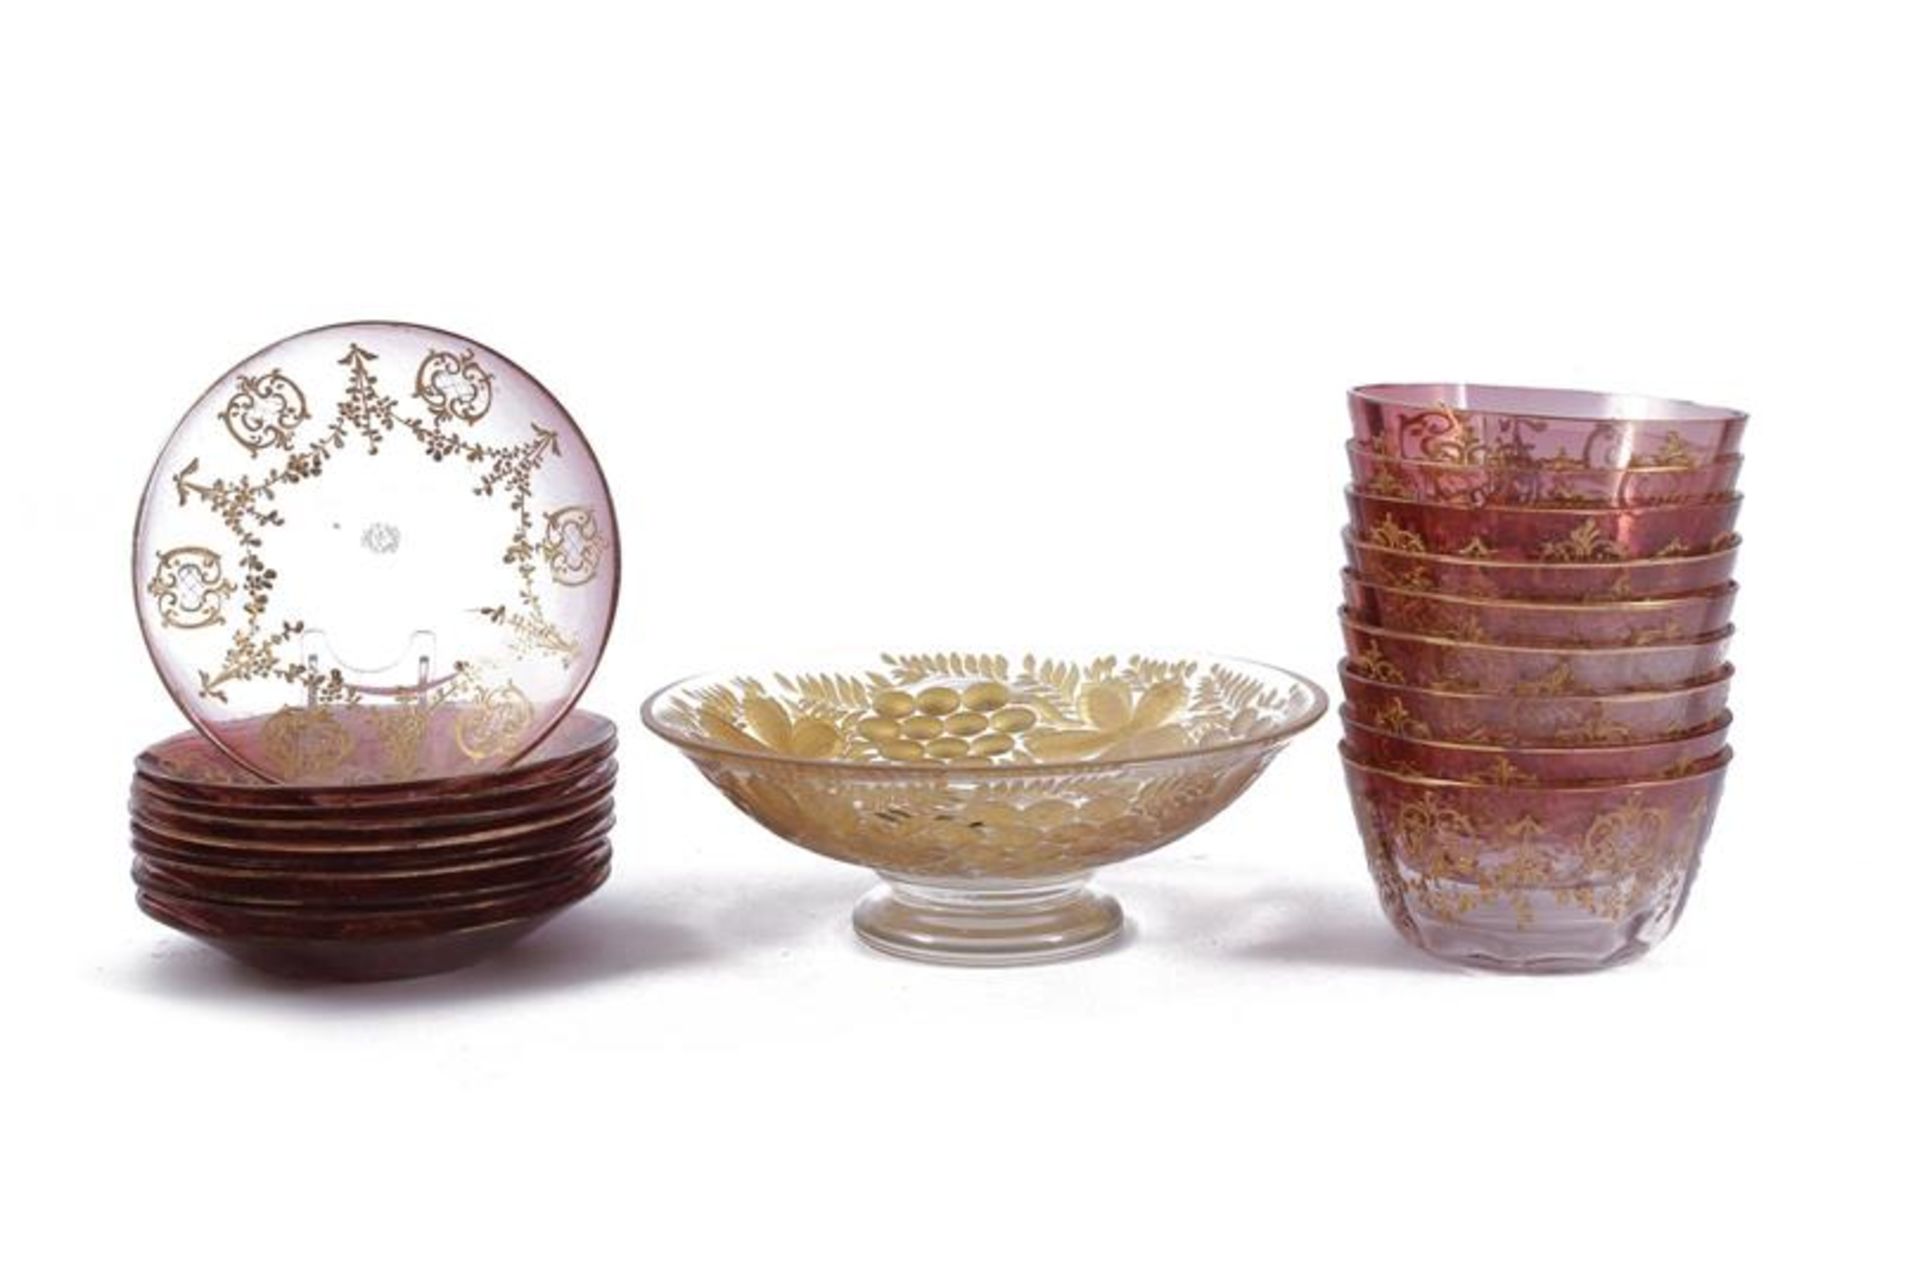 9 colored glass dishes and & nbsp; 10 saucers with gold-colored garland motif, marked Glasfabrik